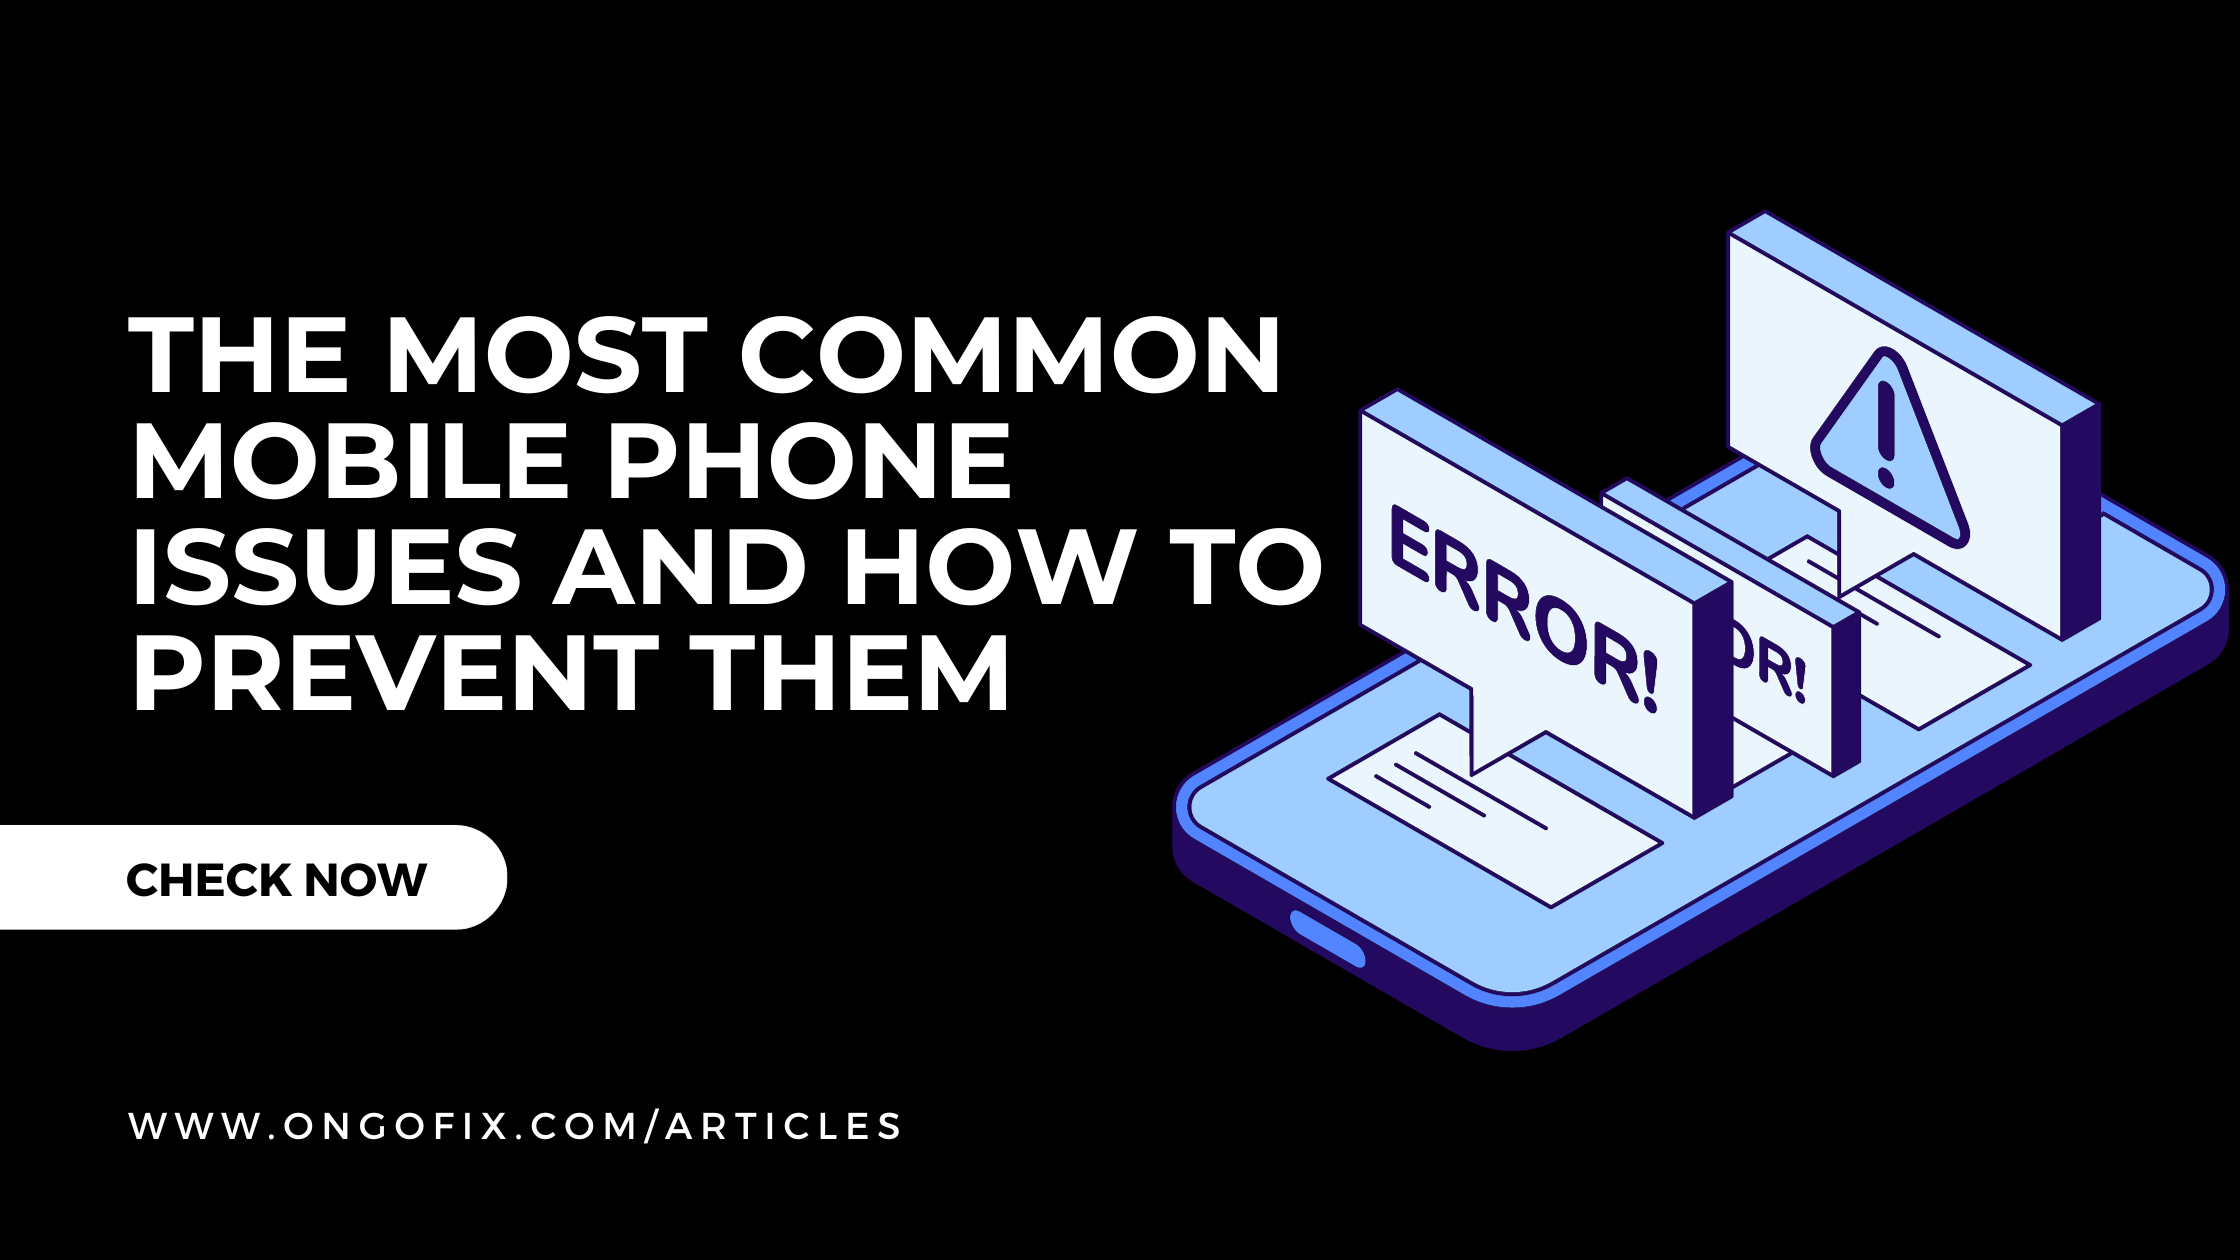 535808The Most Common Mobile Phone Issues and How to Prevent Them.png